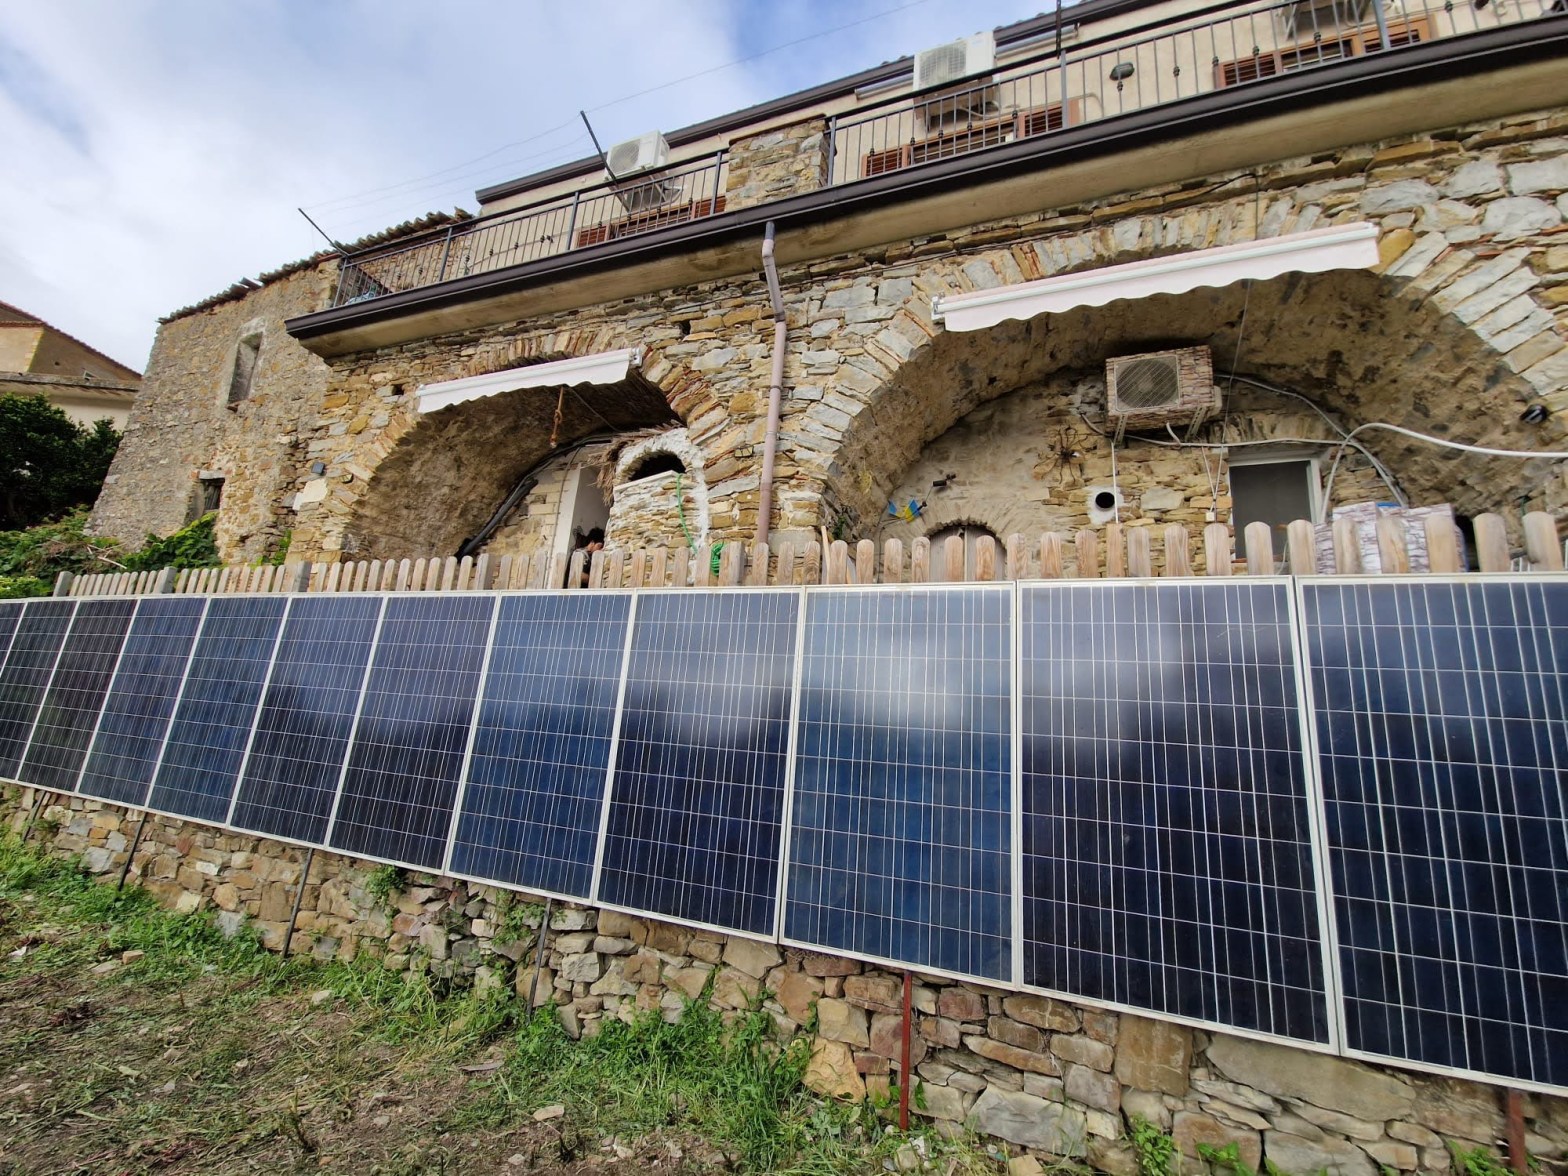 Vertical solar panels with a stone building in the background